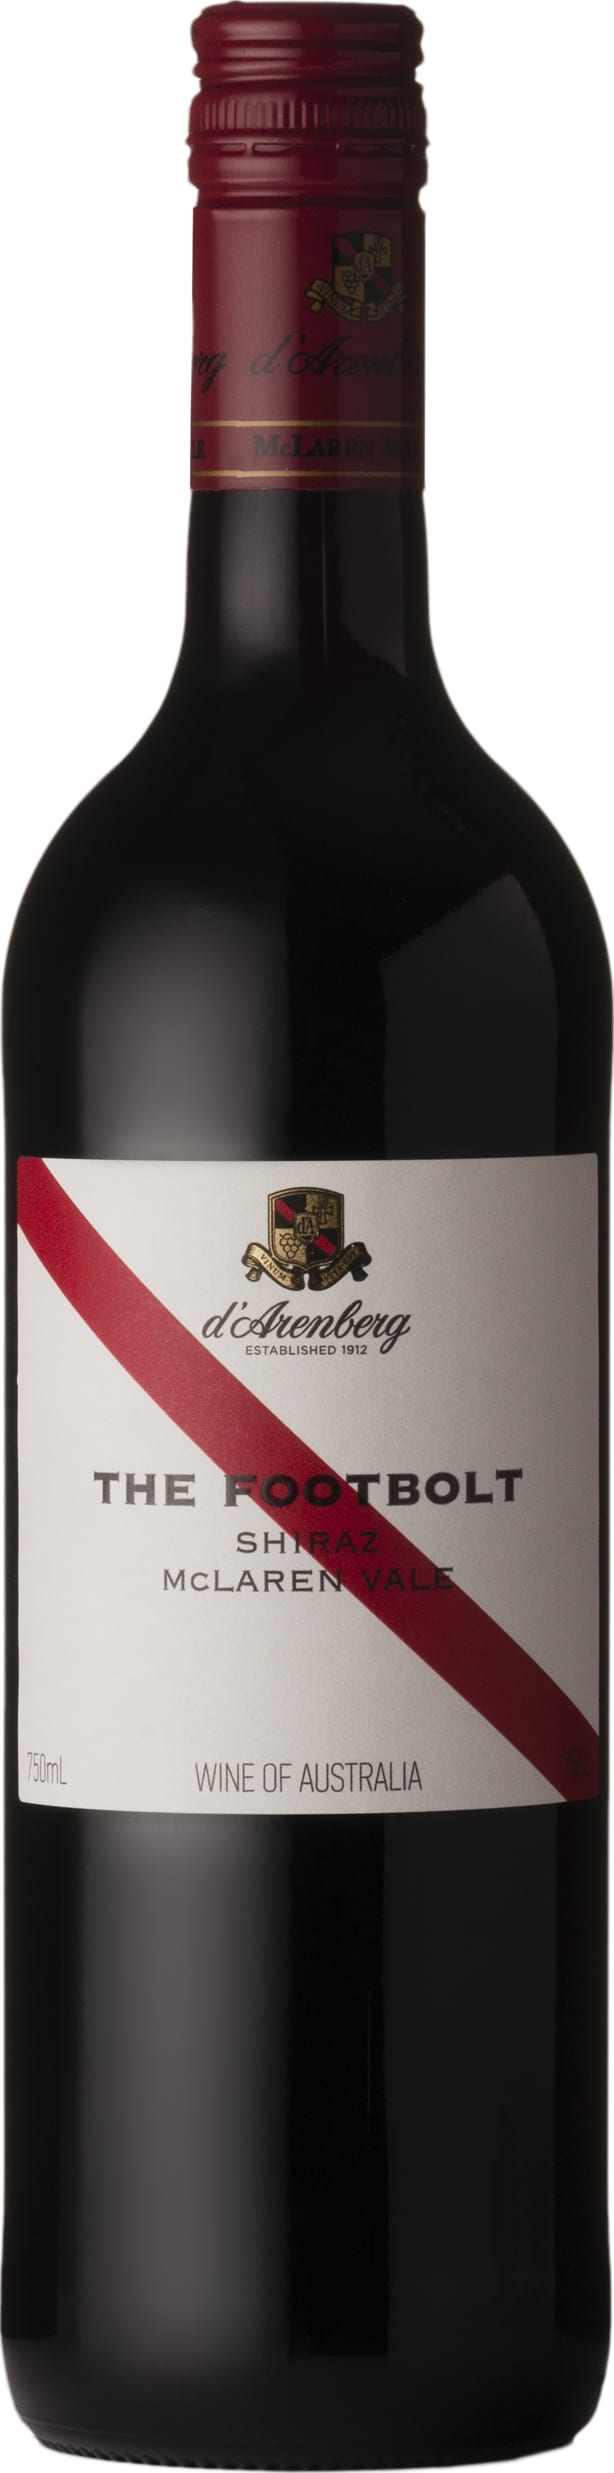 D Arenberg The Footbolt Shiraz 2021 75cl - Buy D Arenberg Wines from GREAT WINES DIRECT wine shop